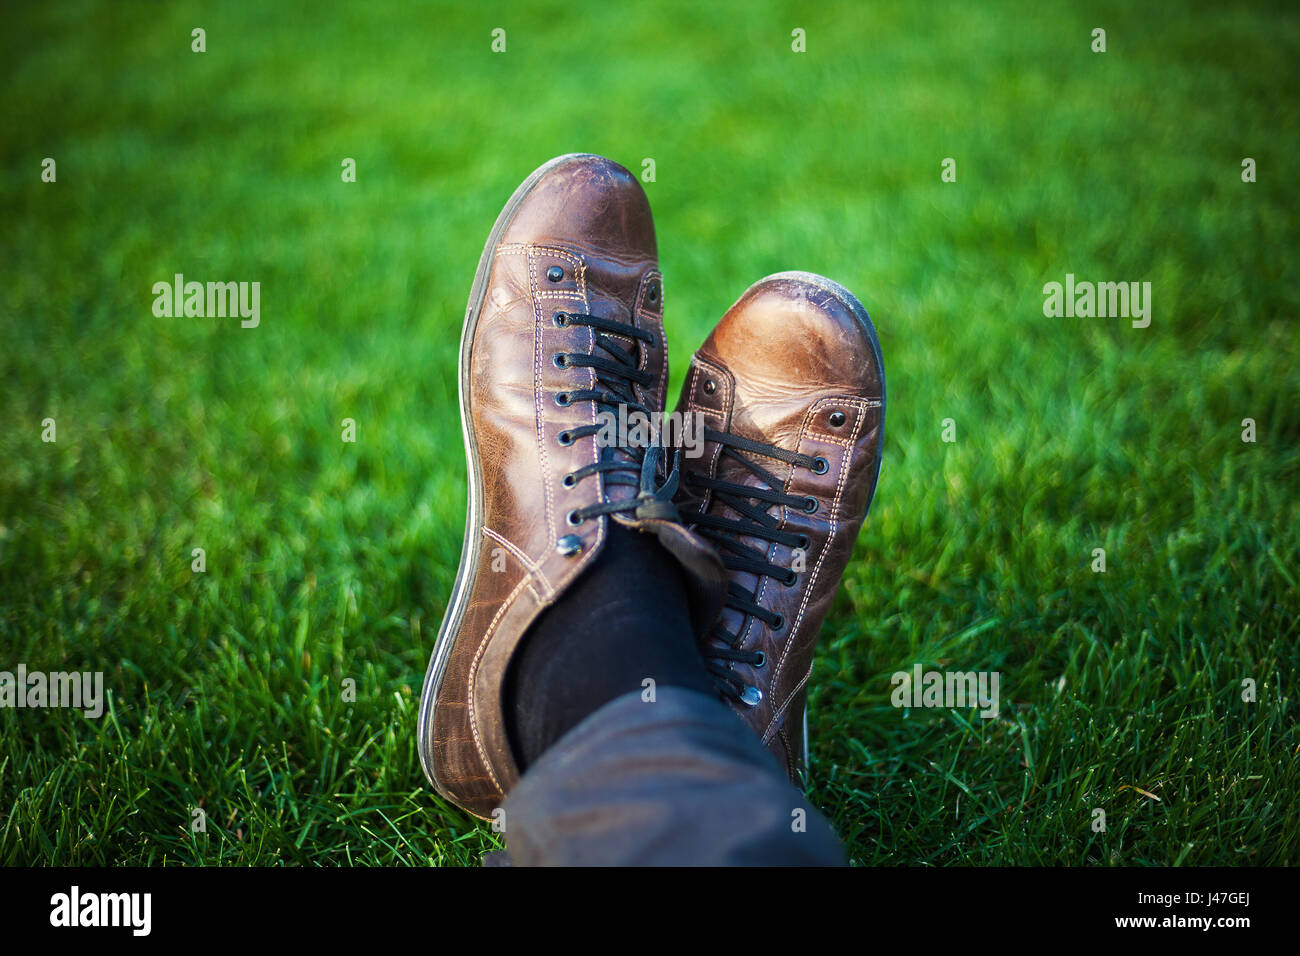 Two legs in leather shoes resting on fresh grass. Stock Photo